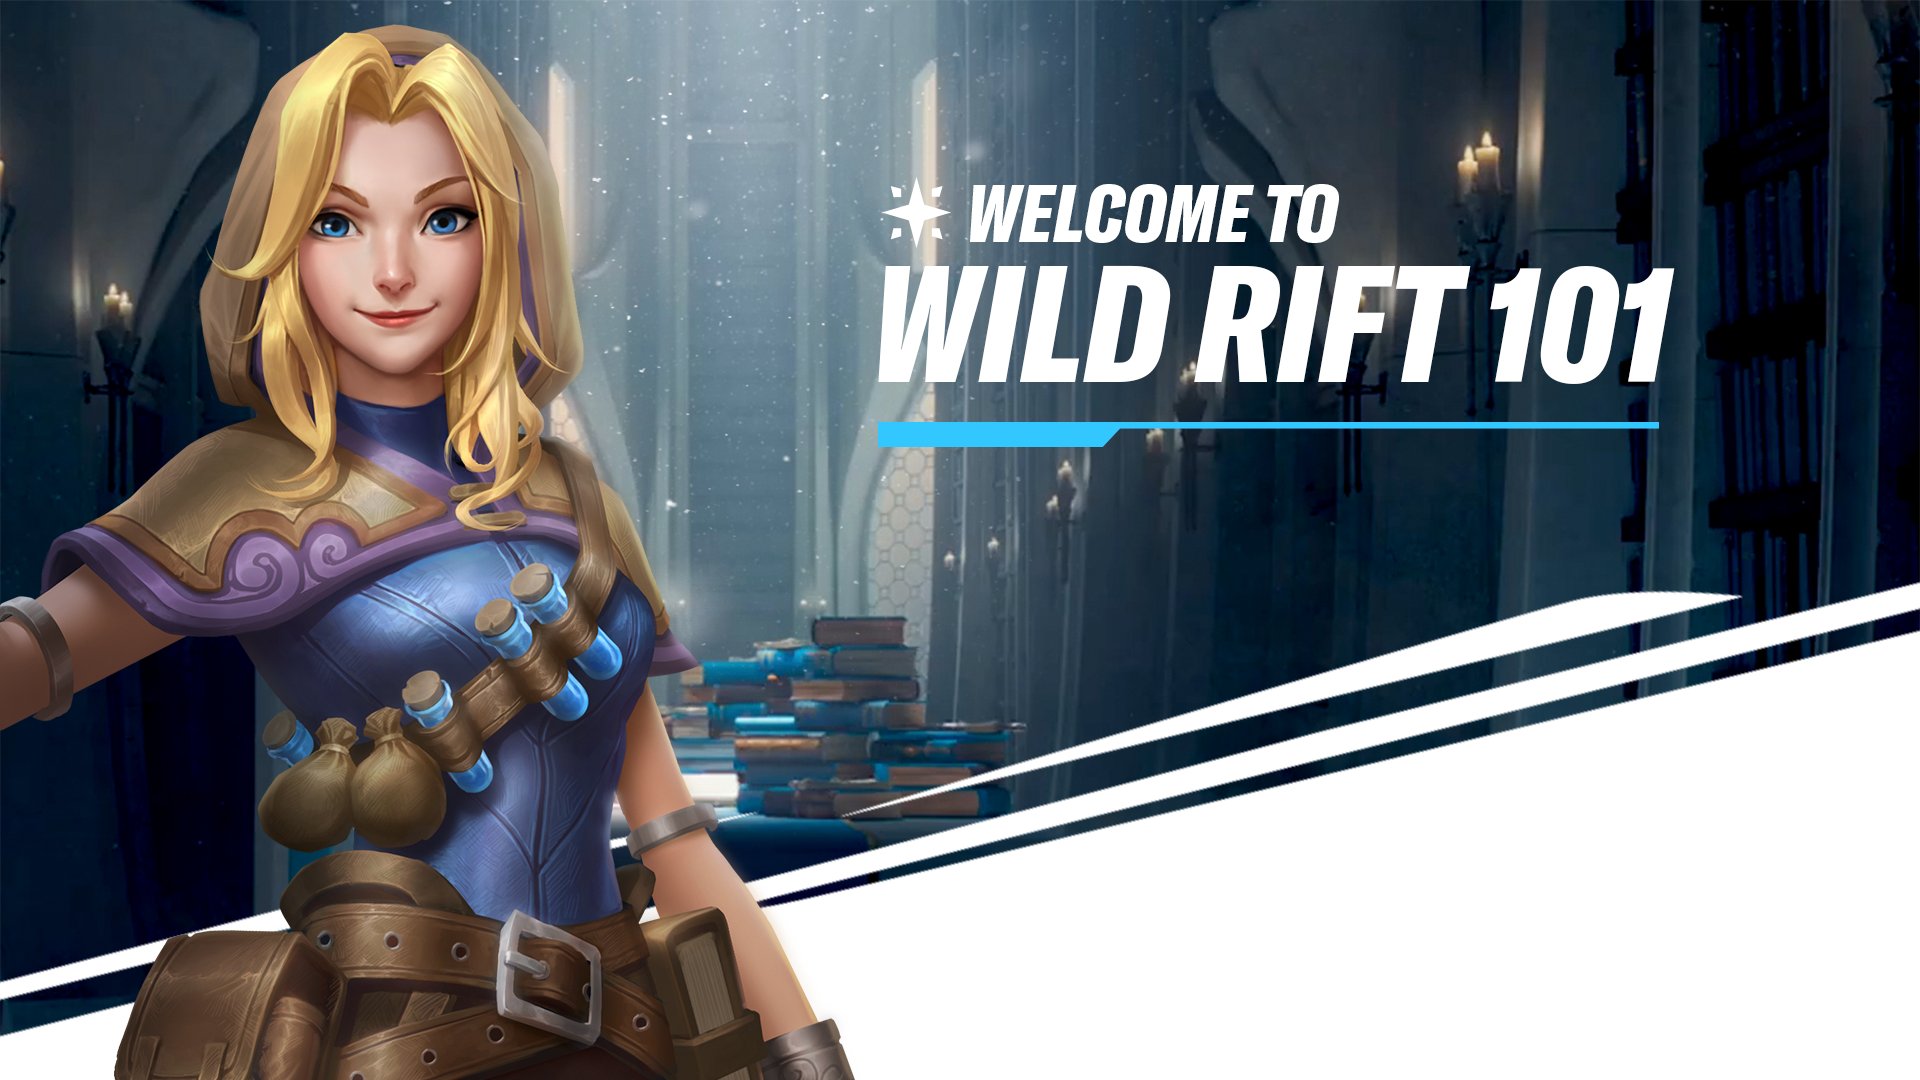 The Wild Welcome event in - League of Legends: Wild Rift